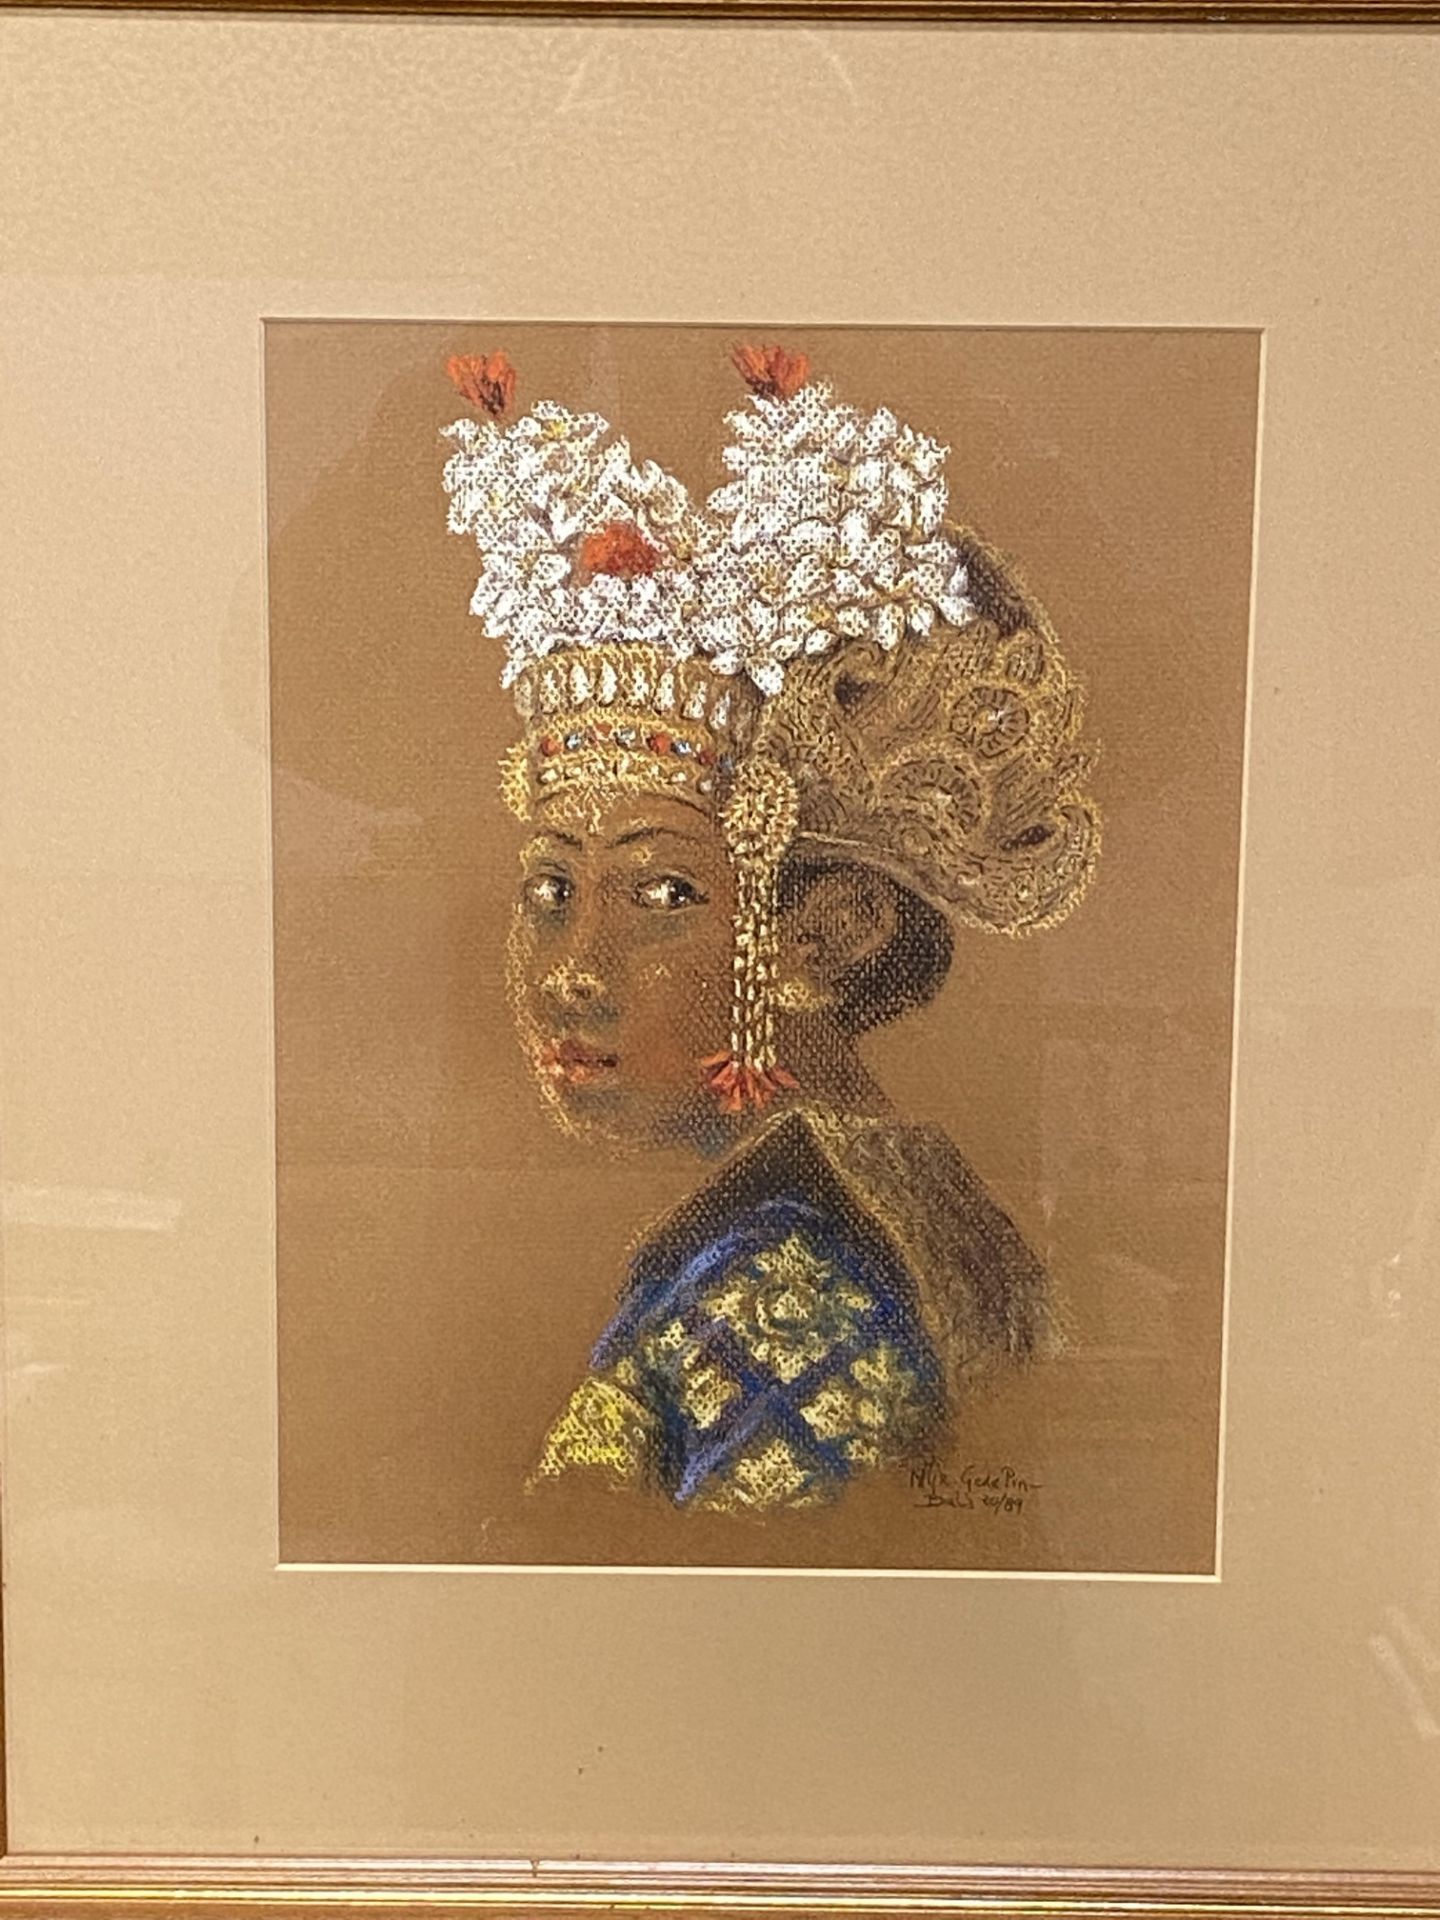 Framed and glazed pastel portrait of a Balinese girl - Image 3 of 3